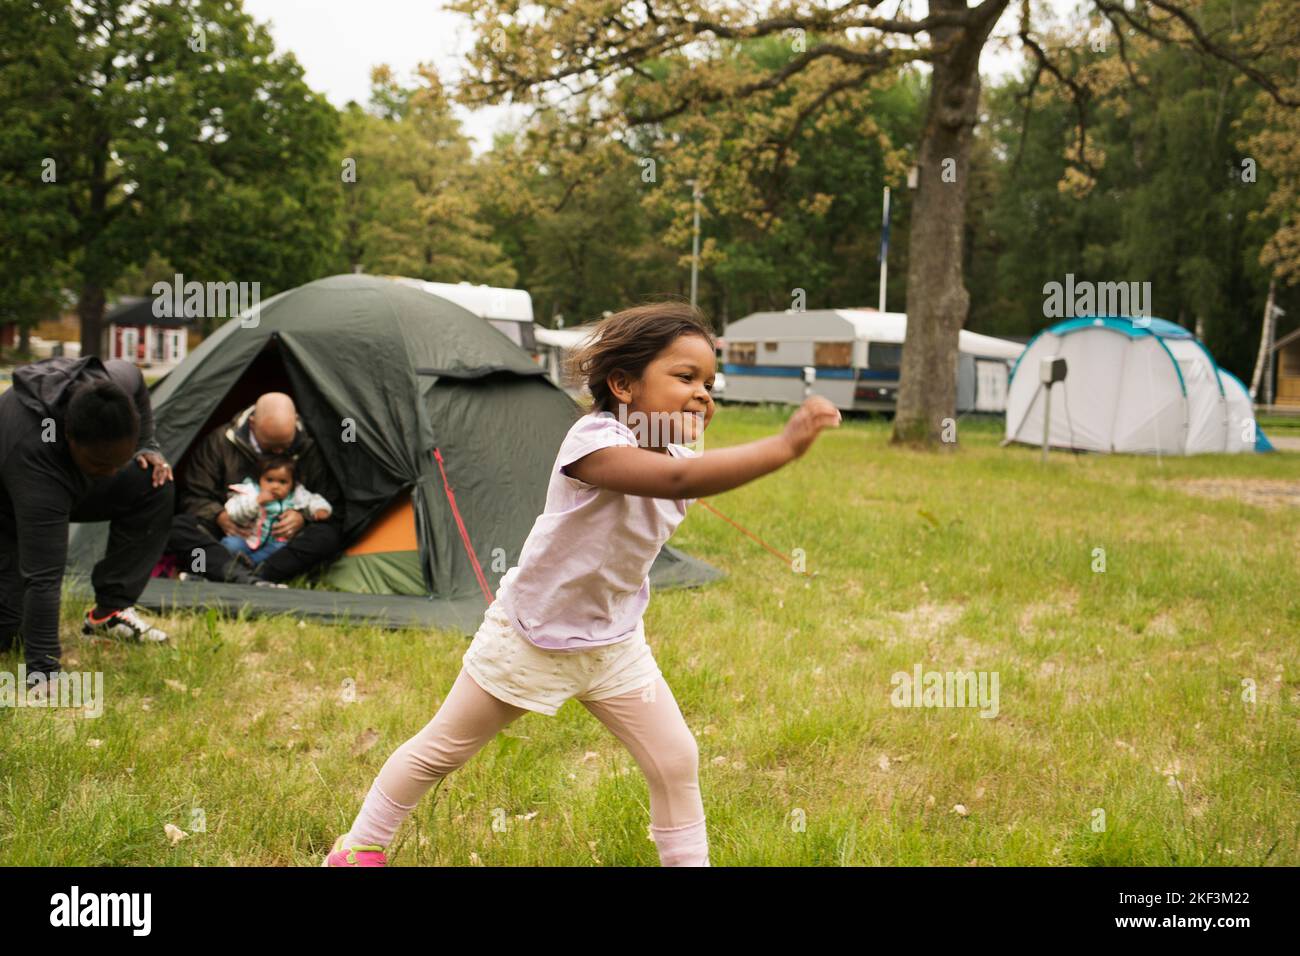 Girl playing by tent while camping Stock Photo